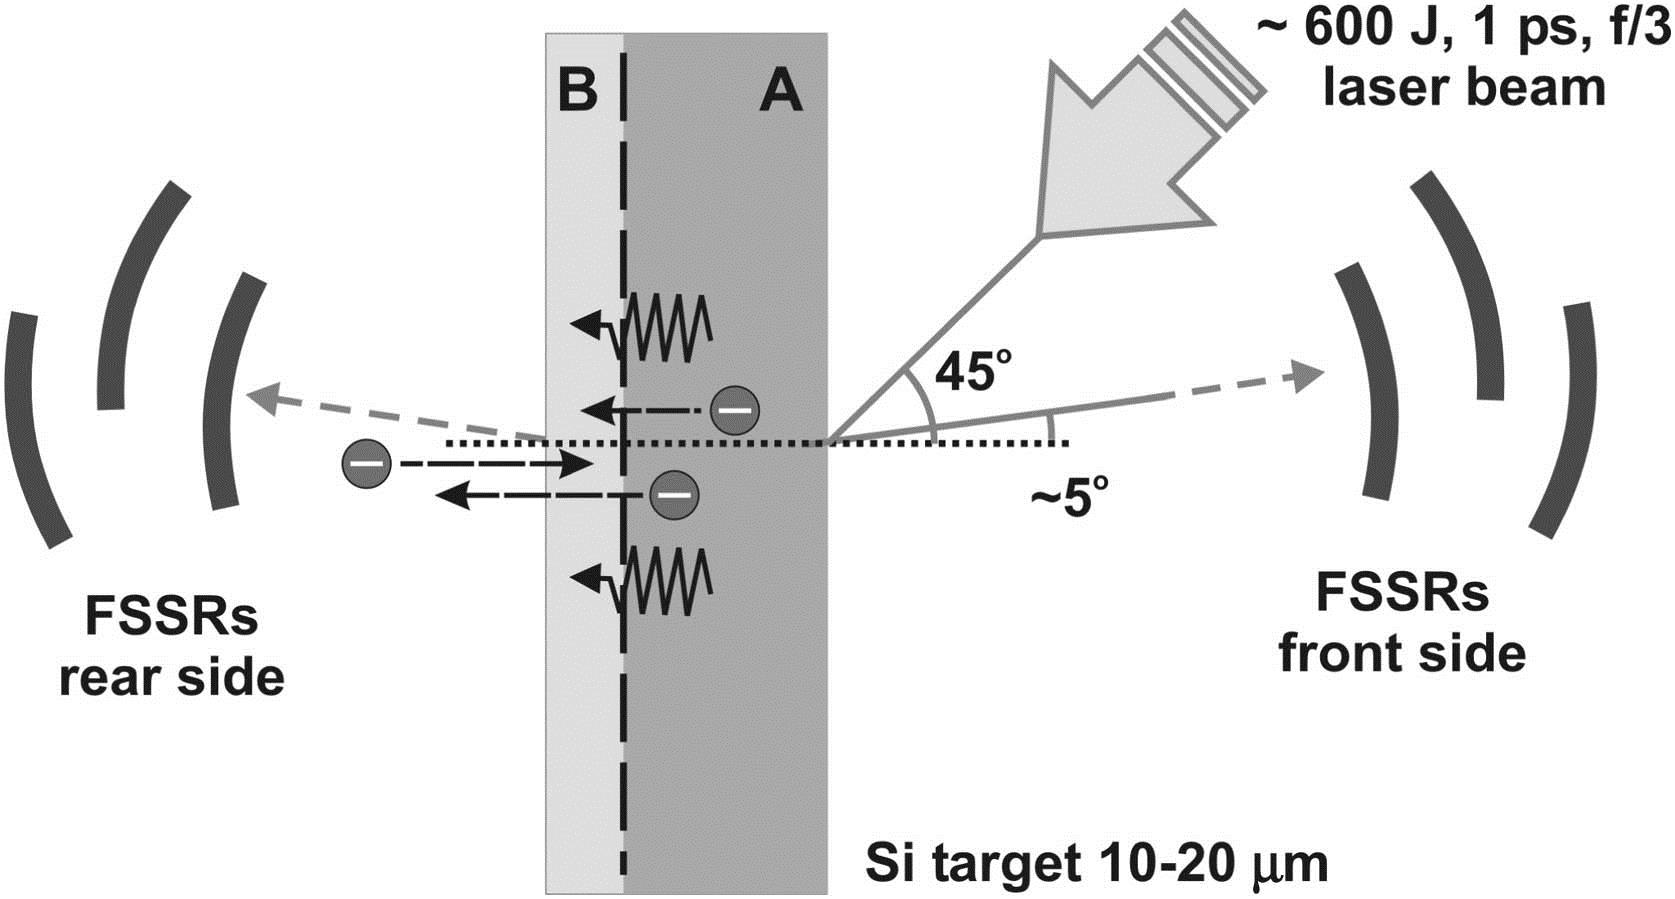 Experimental layout showing the division of single material target split into Layers A and B and the location of the front and rear spectrometers.